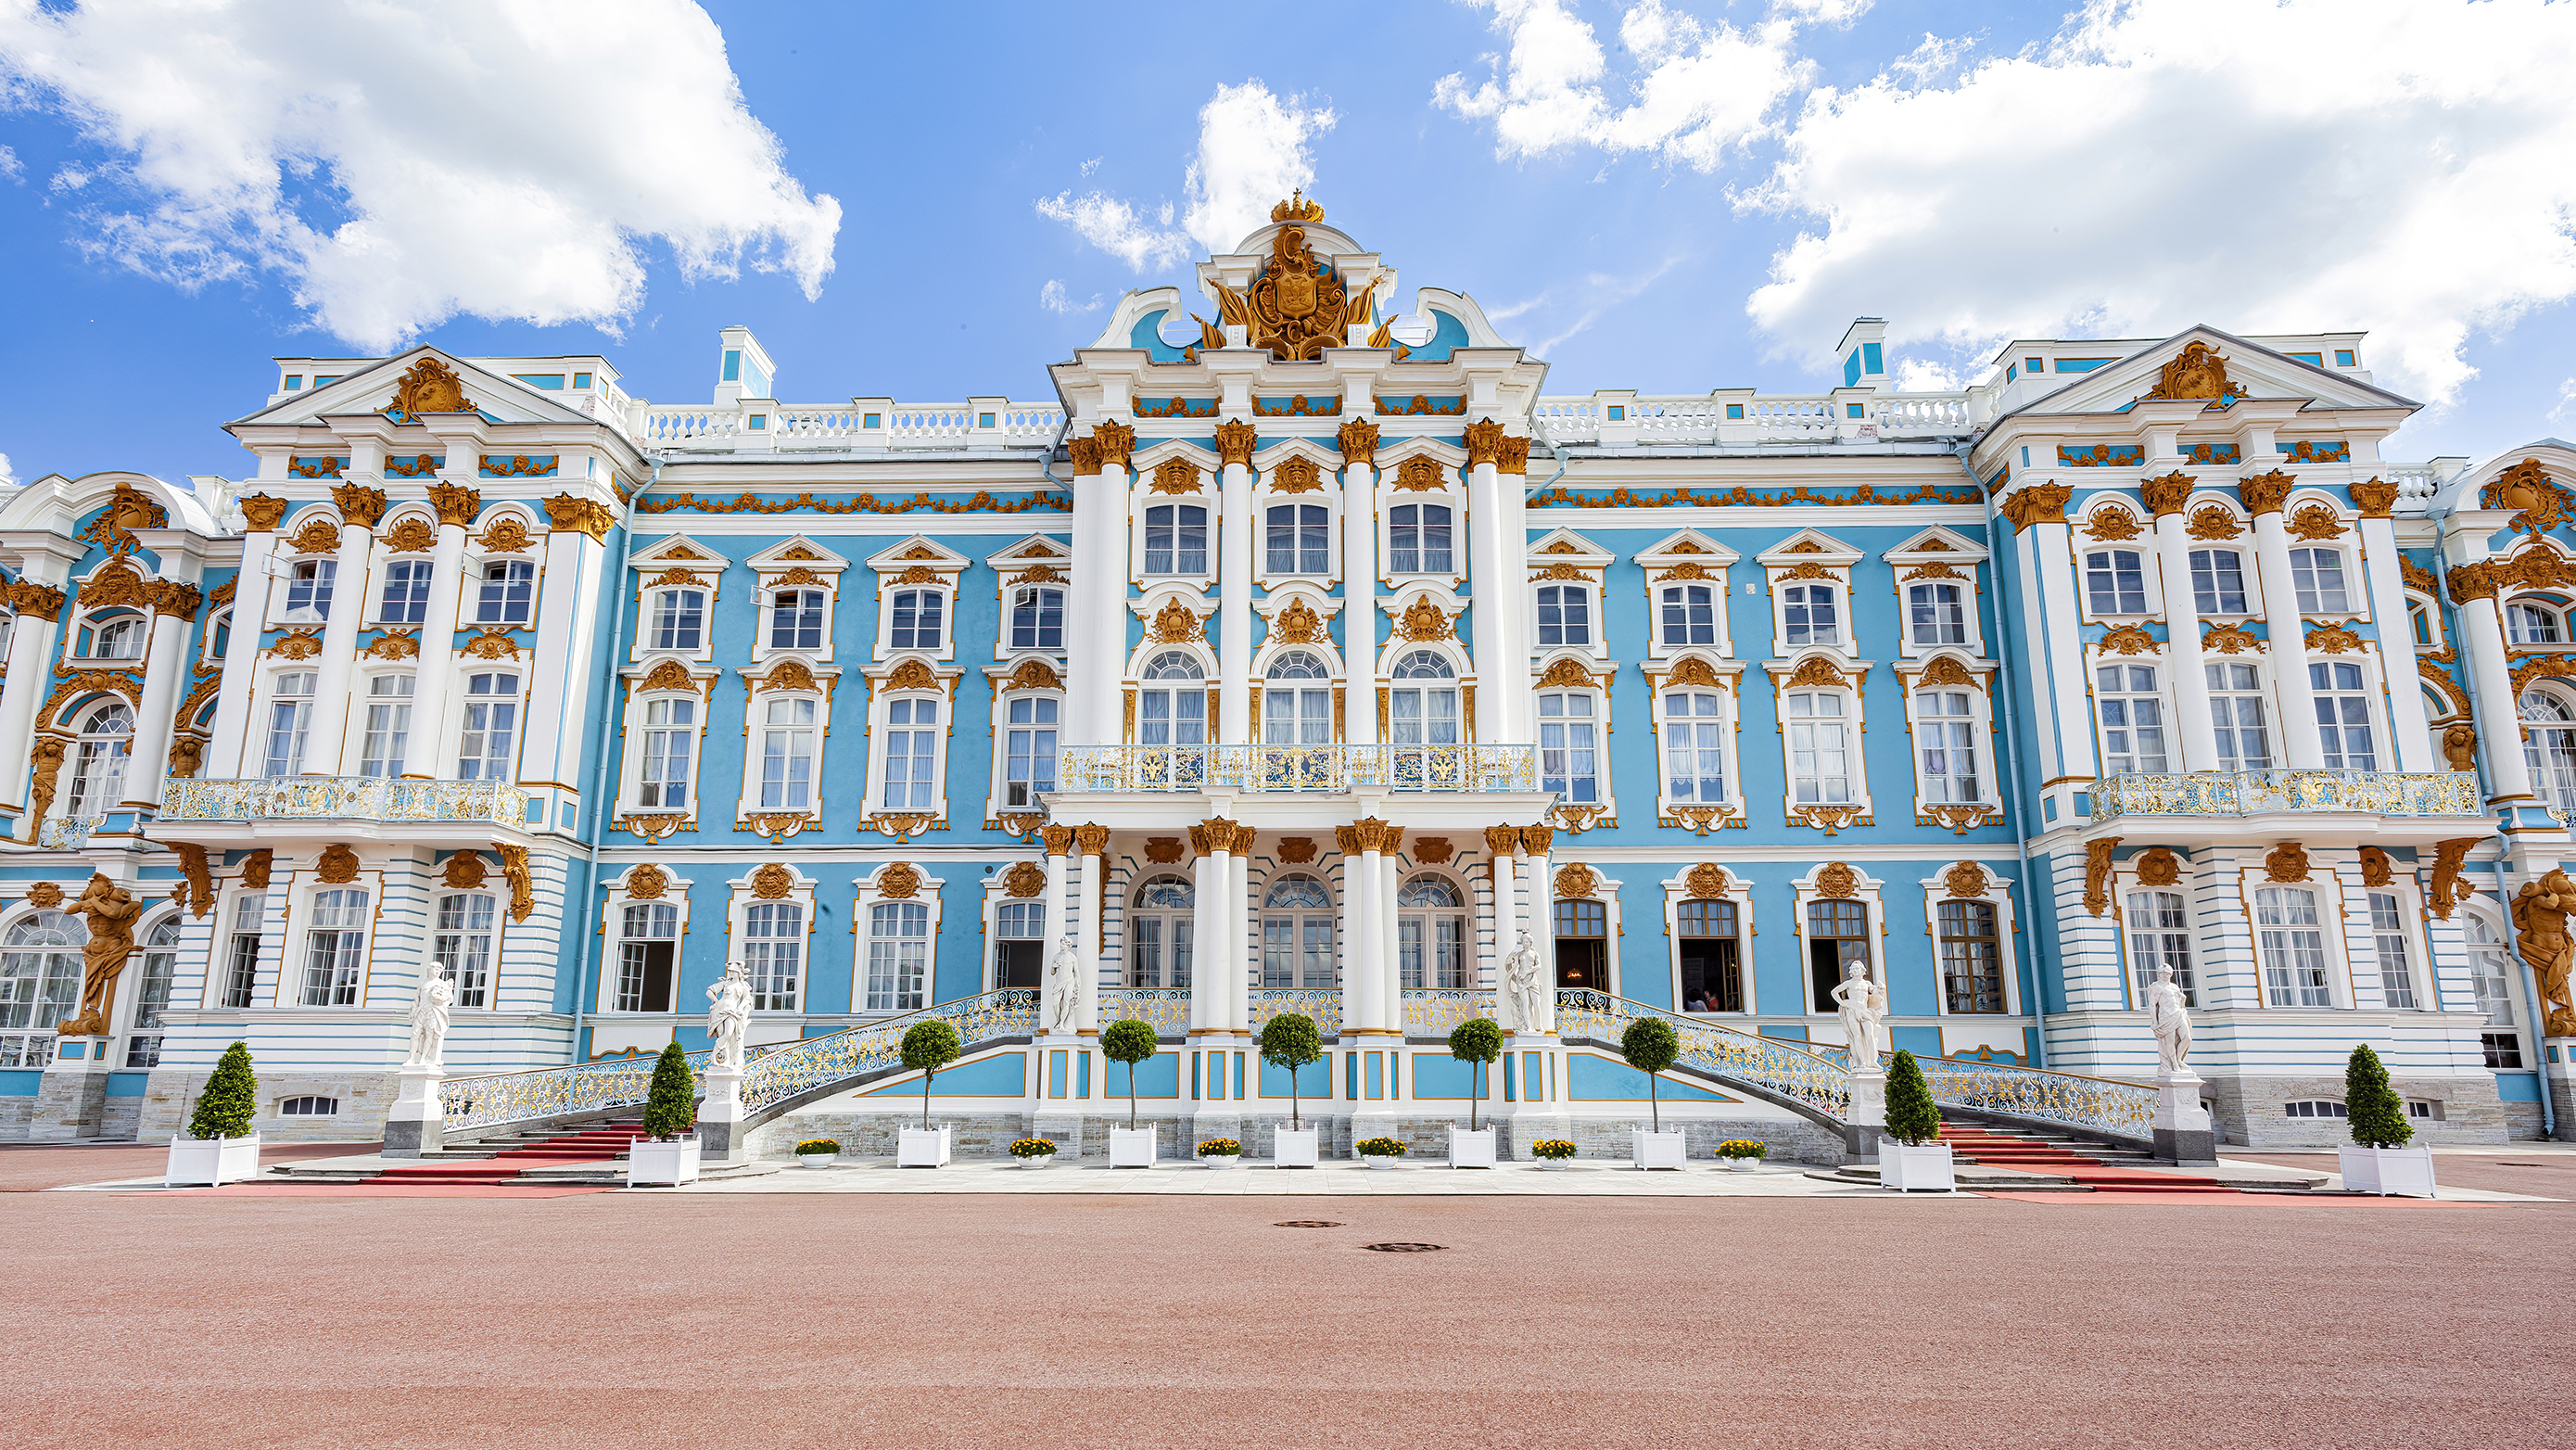 Iconic cities Saint Petersburg Catherine Palace Russia July 2012 02